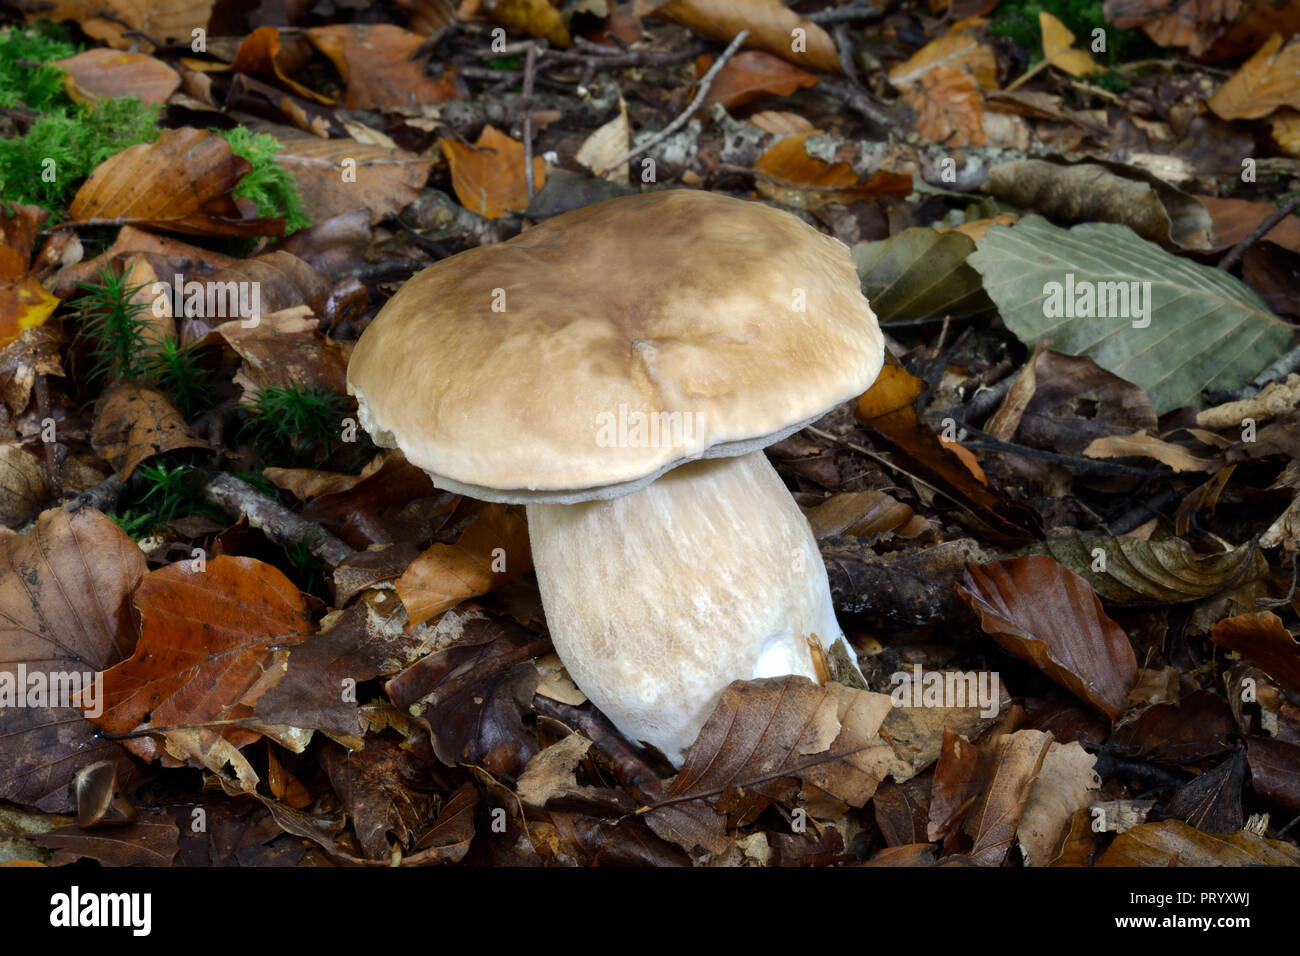 Boletus edulis (commonly known as penny bun or cep) is a basidiomycete fungus found in a variety of woodland types. It is very good to eat. Stock Photo